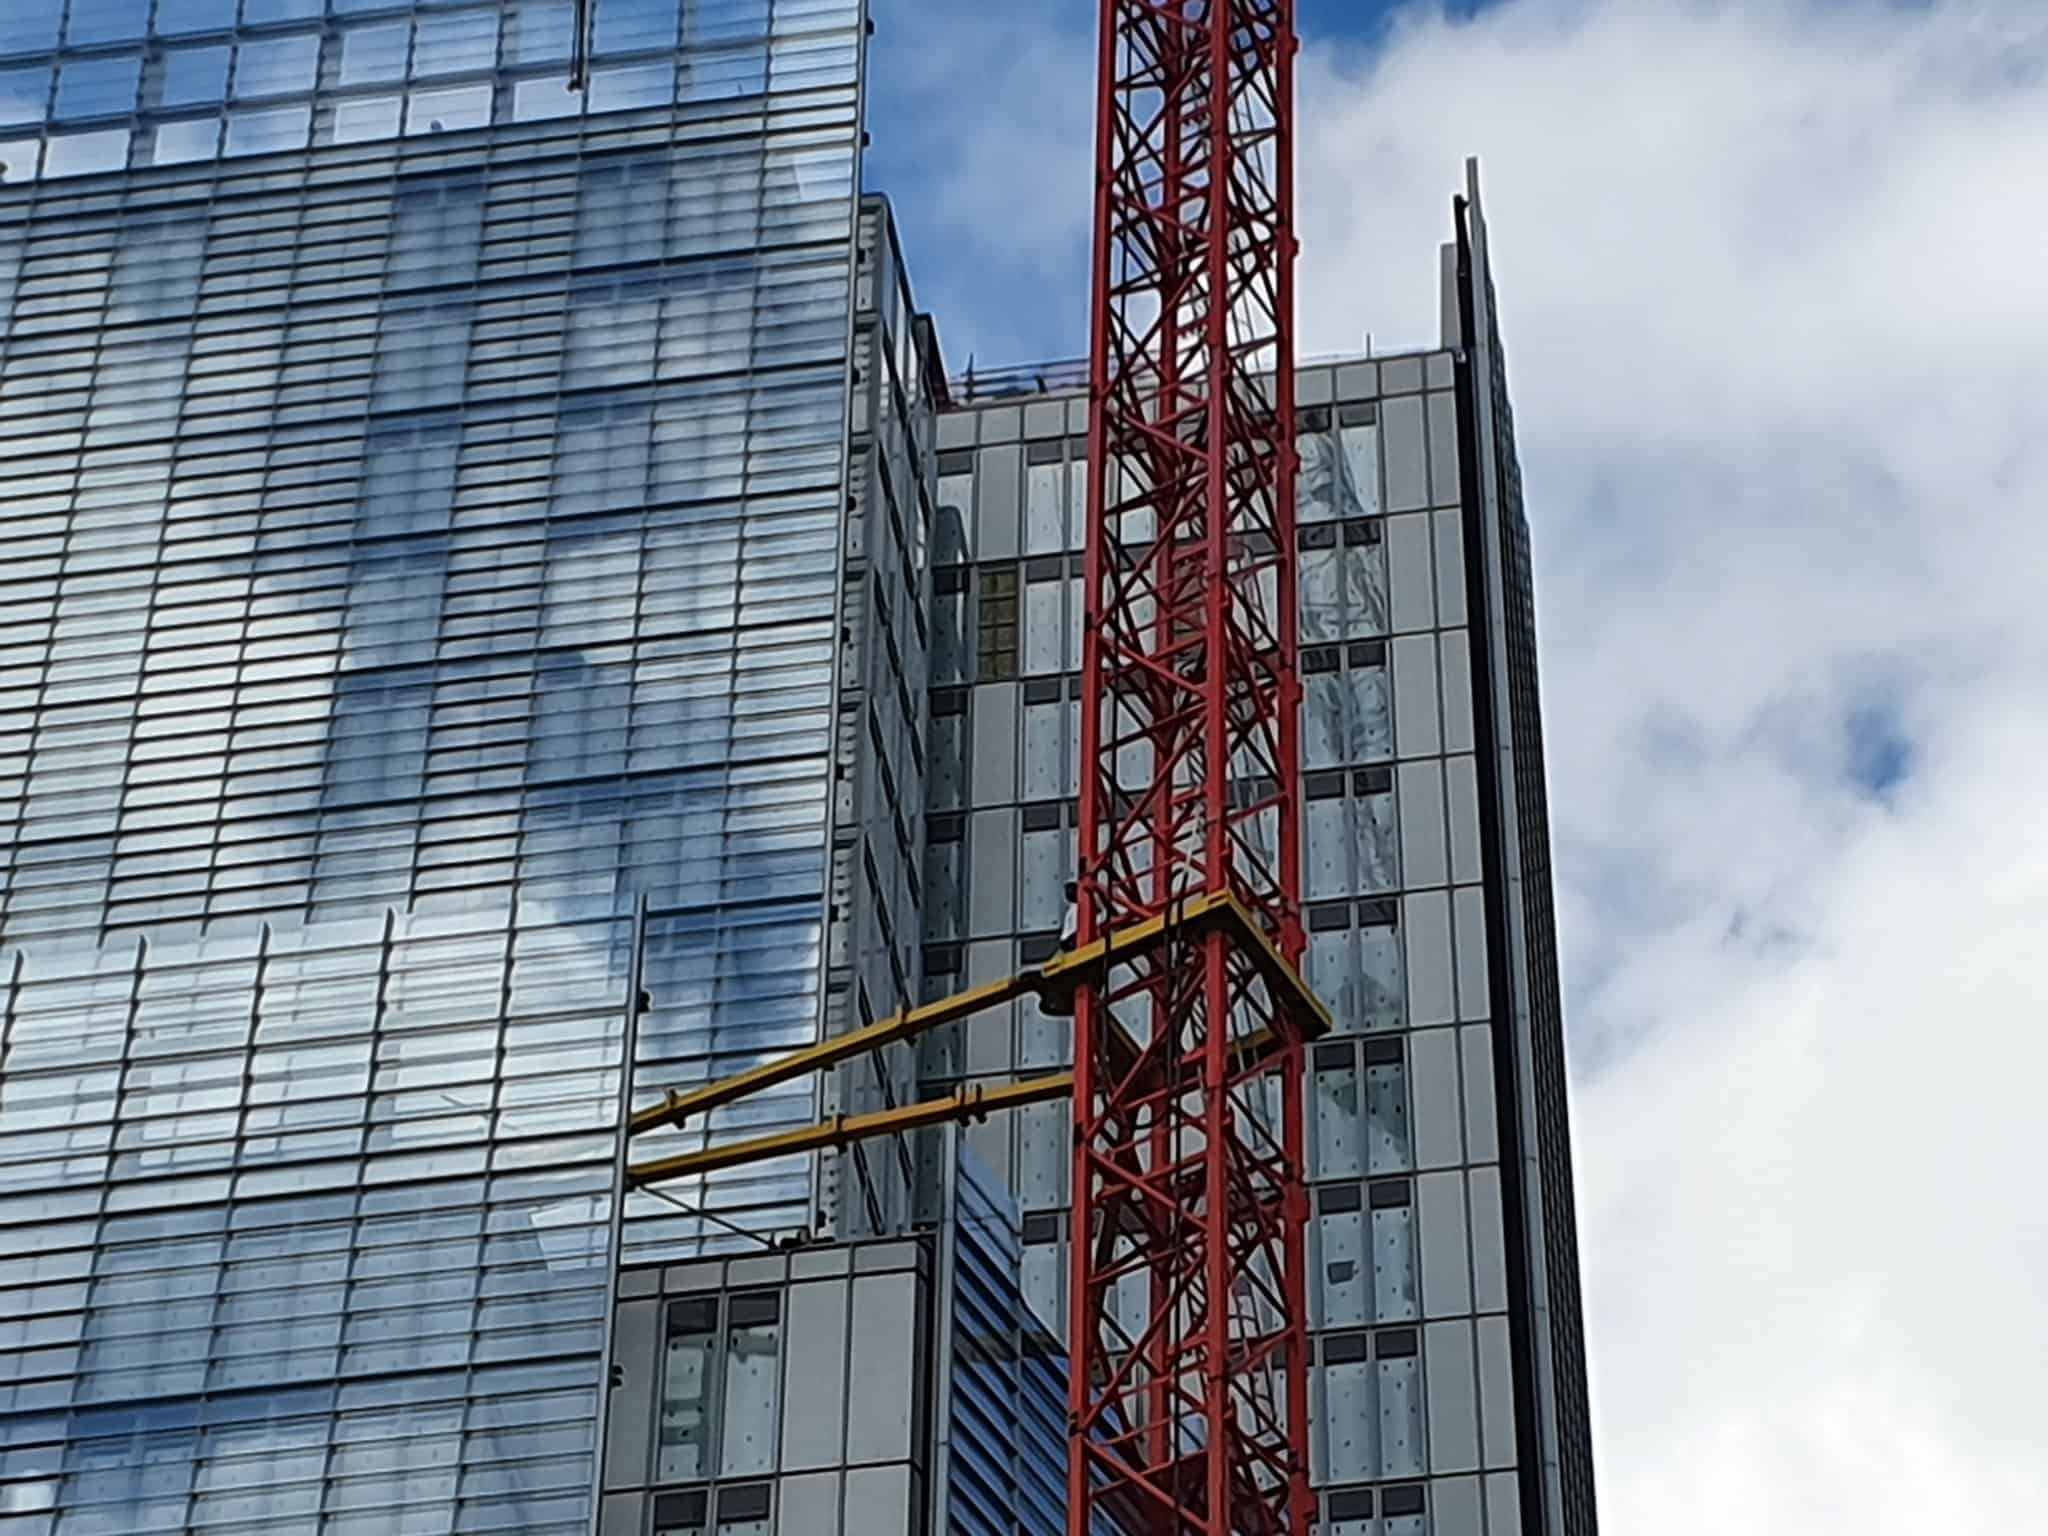 The man has been arrested after scaling the crane at height for five hours yesterday (Image: Hardeep Matharu)